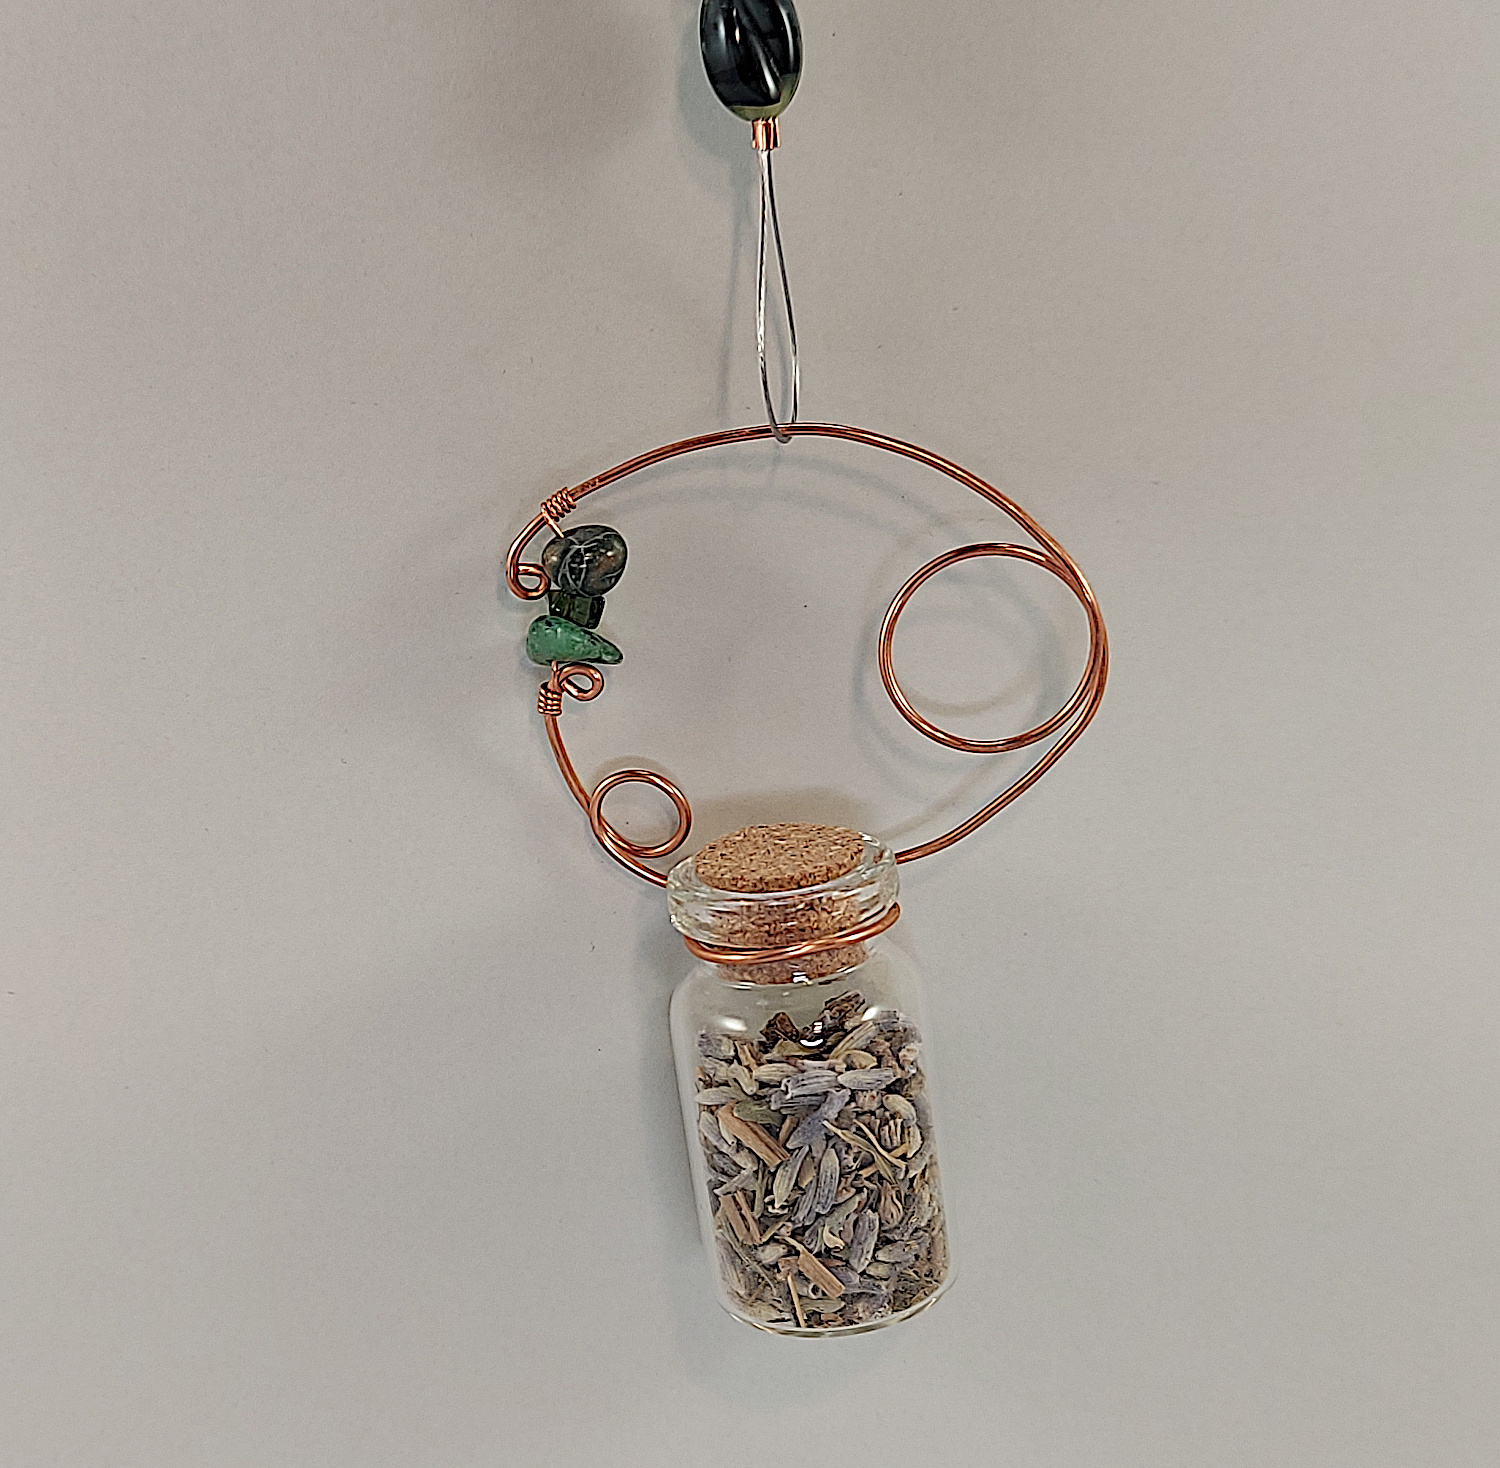 Stone and Herb Sun Catchers - COMING SOON